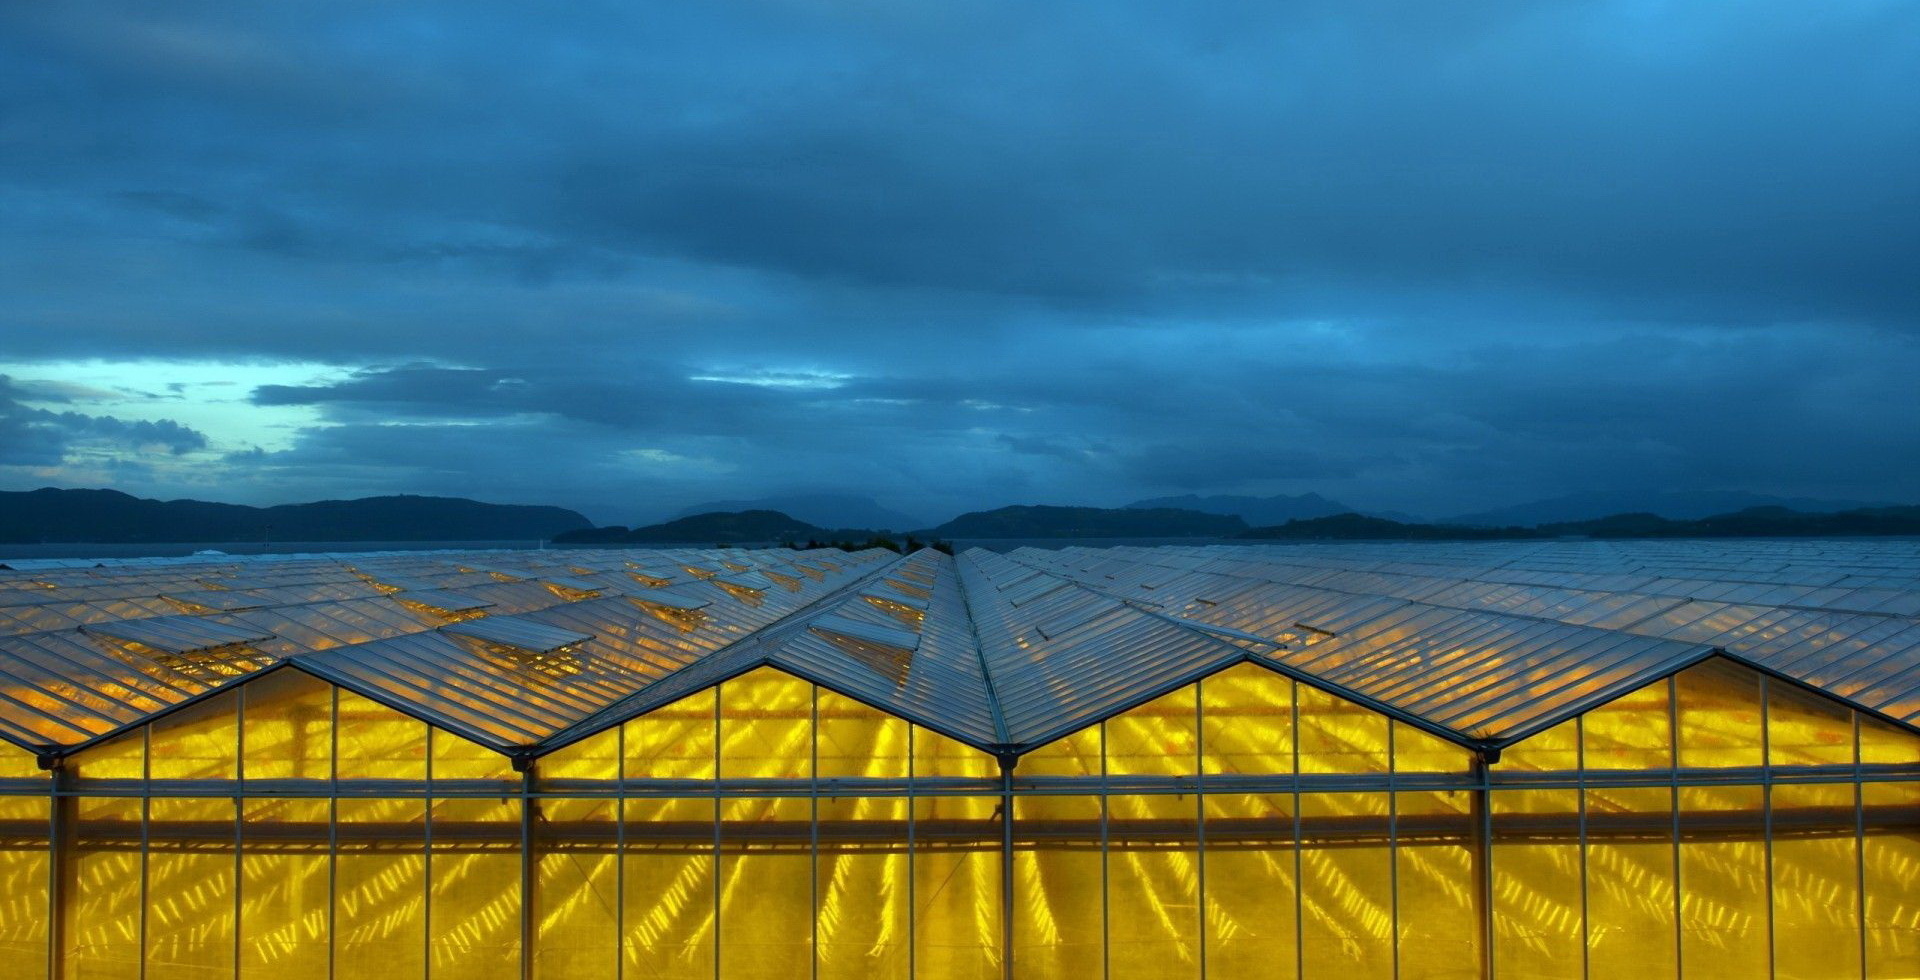    UV Stabilization of Polycarbonate Roofing Sheets    New Product for Better Living   &lt;/div